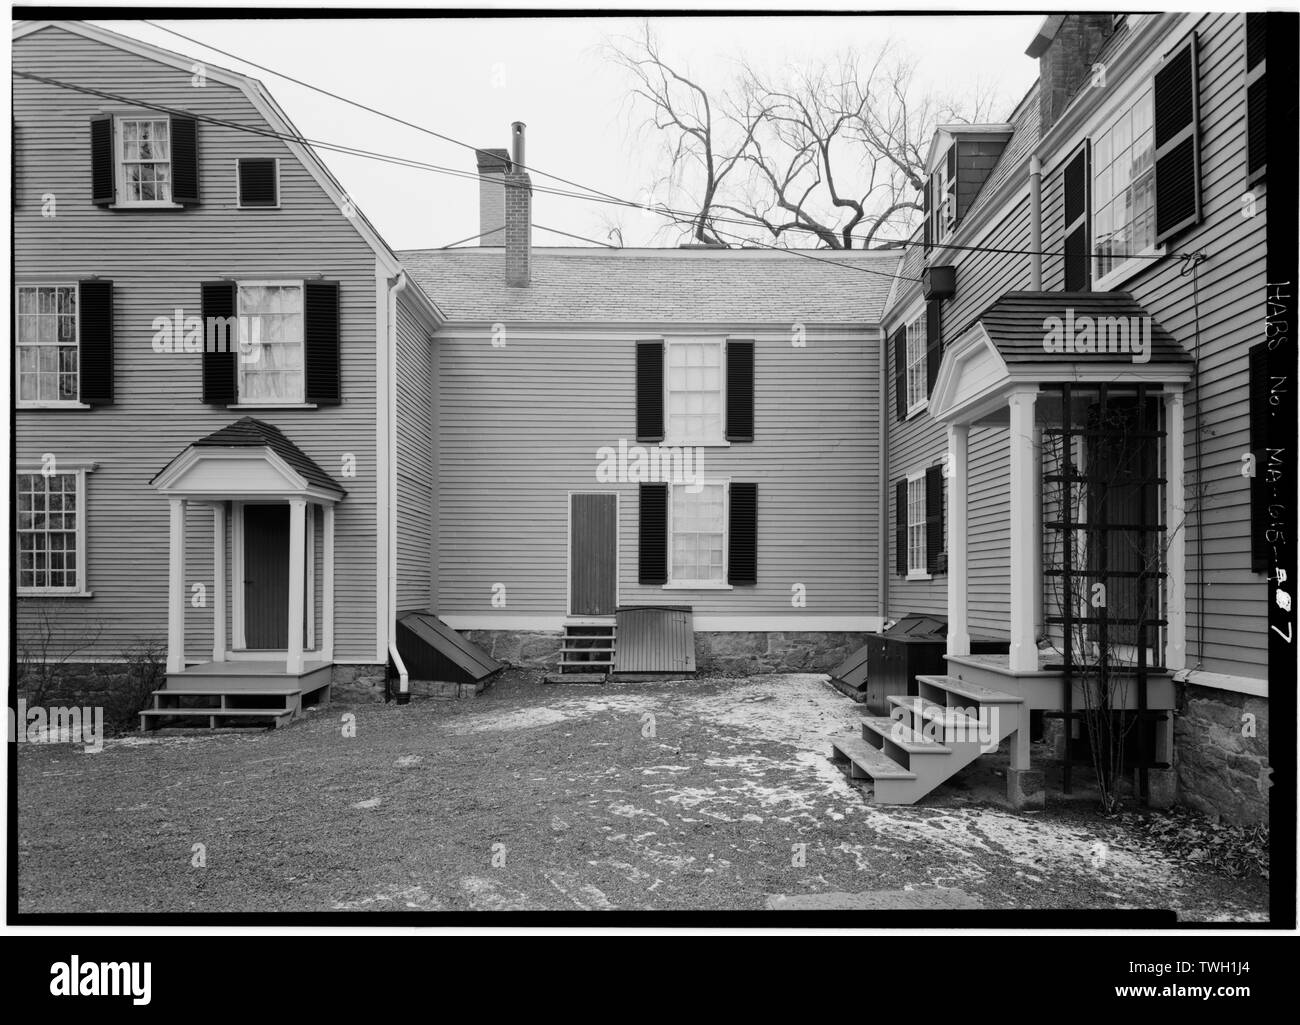 Rear north side of house - Adams Mansion, 135 Adams Street, Quincy, Norfolk County, MA; Adams, John Quincy; Adams, Abigail; Adams, Brooks; Adams, John; Adams, Charles Francis; Vassall, Leonard; Winterowd, George C, project manager; Gilchrist, Agnes A, historian; Smith, Robert, delineator; Kirk, Donald, delineator; Sawyers, Harold K, delineator; Simpson, William, delineator; Winterowd, George, delineator; Robinson, Cervin, photographer; Peterson, Charles E, photographer Stock Photo